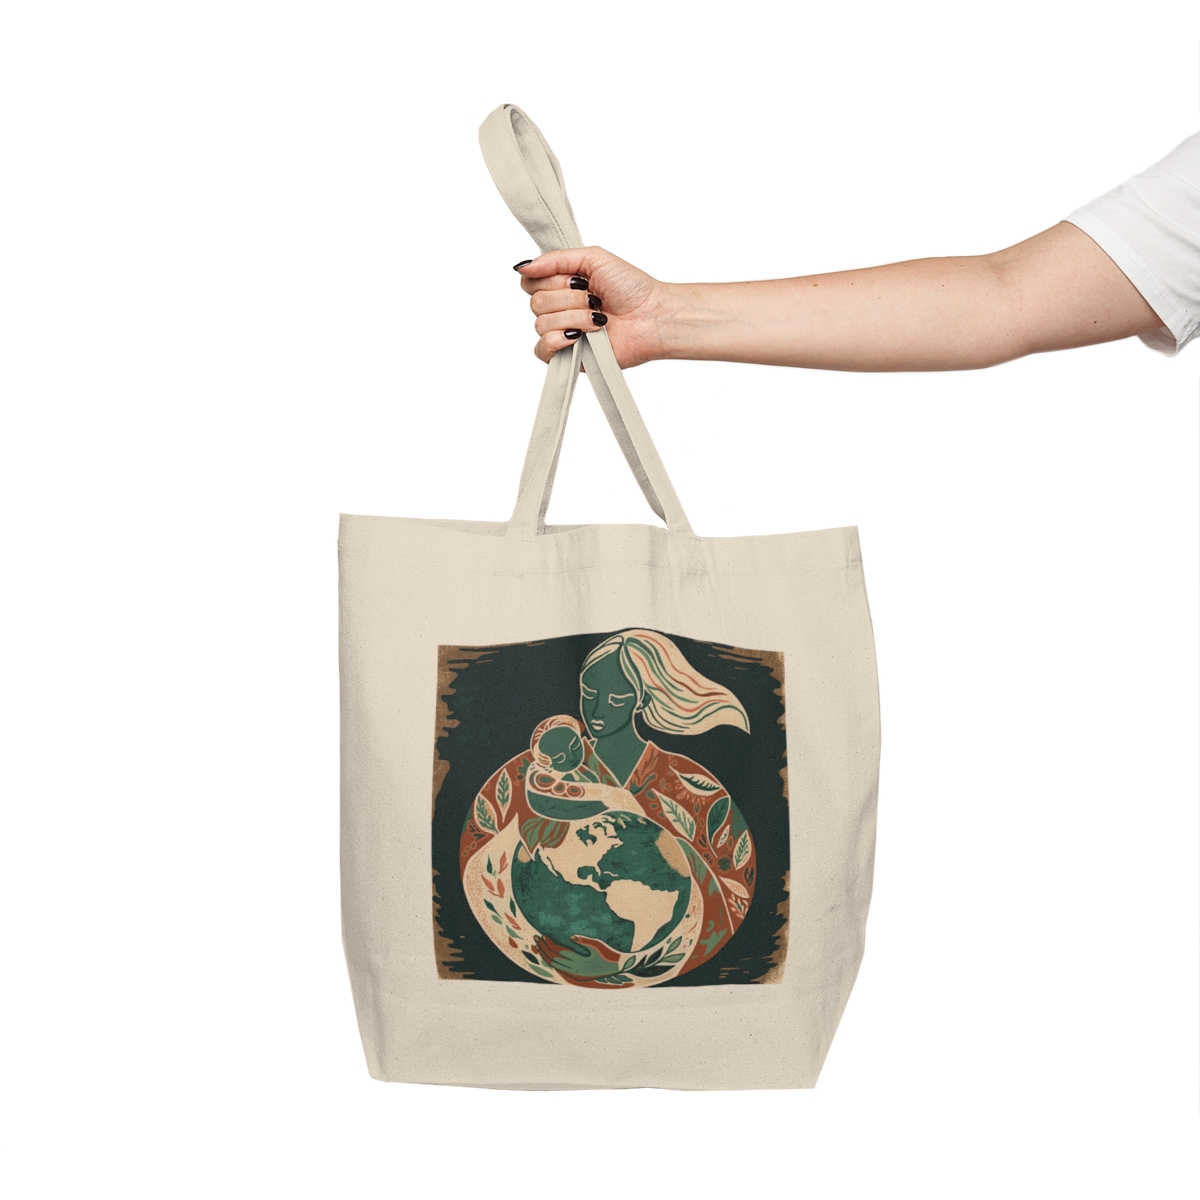 Wombs of the World Foundation Limited Edition Art Collaboration with Olivia Jane Art Tote Bag product thumbnail image